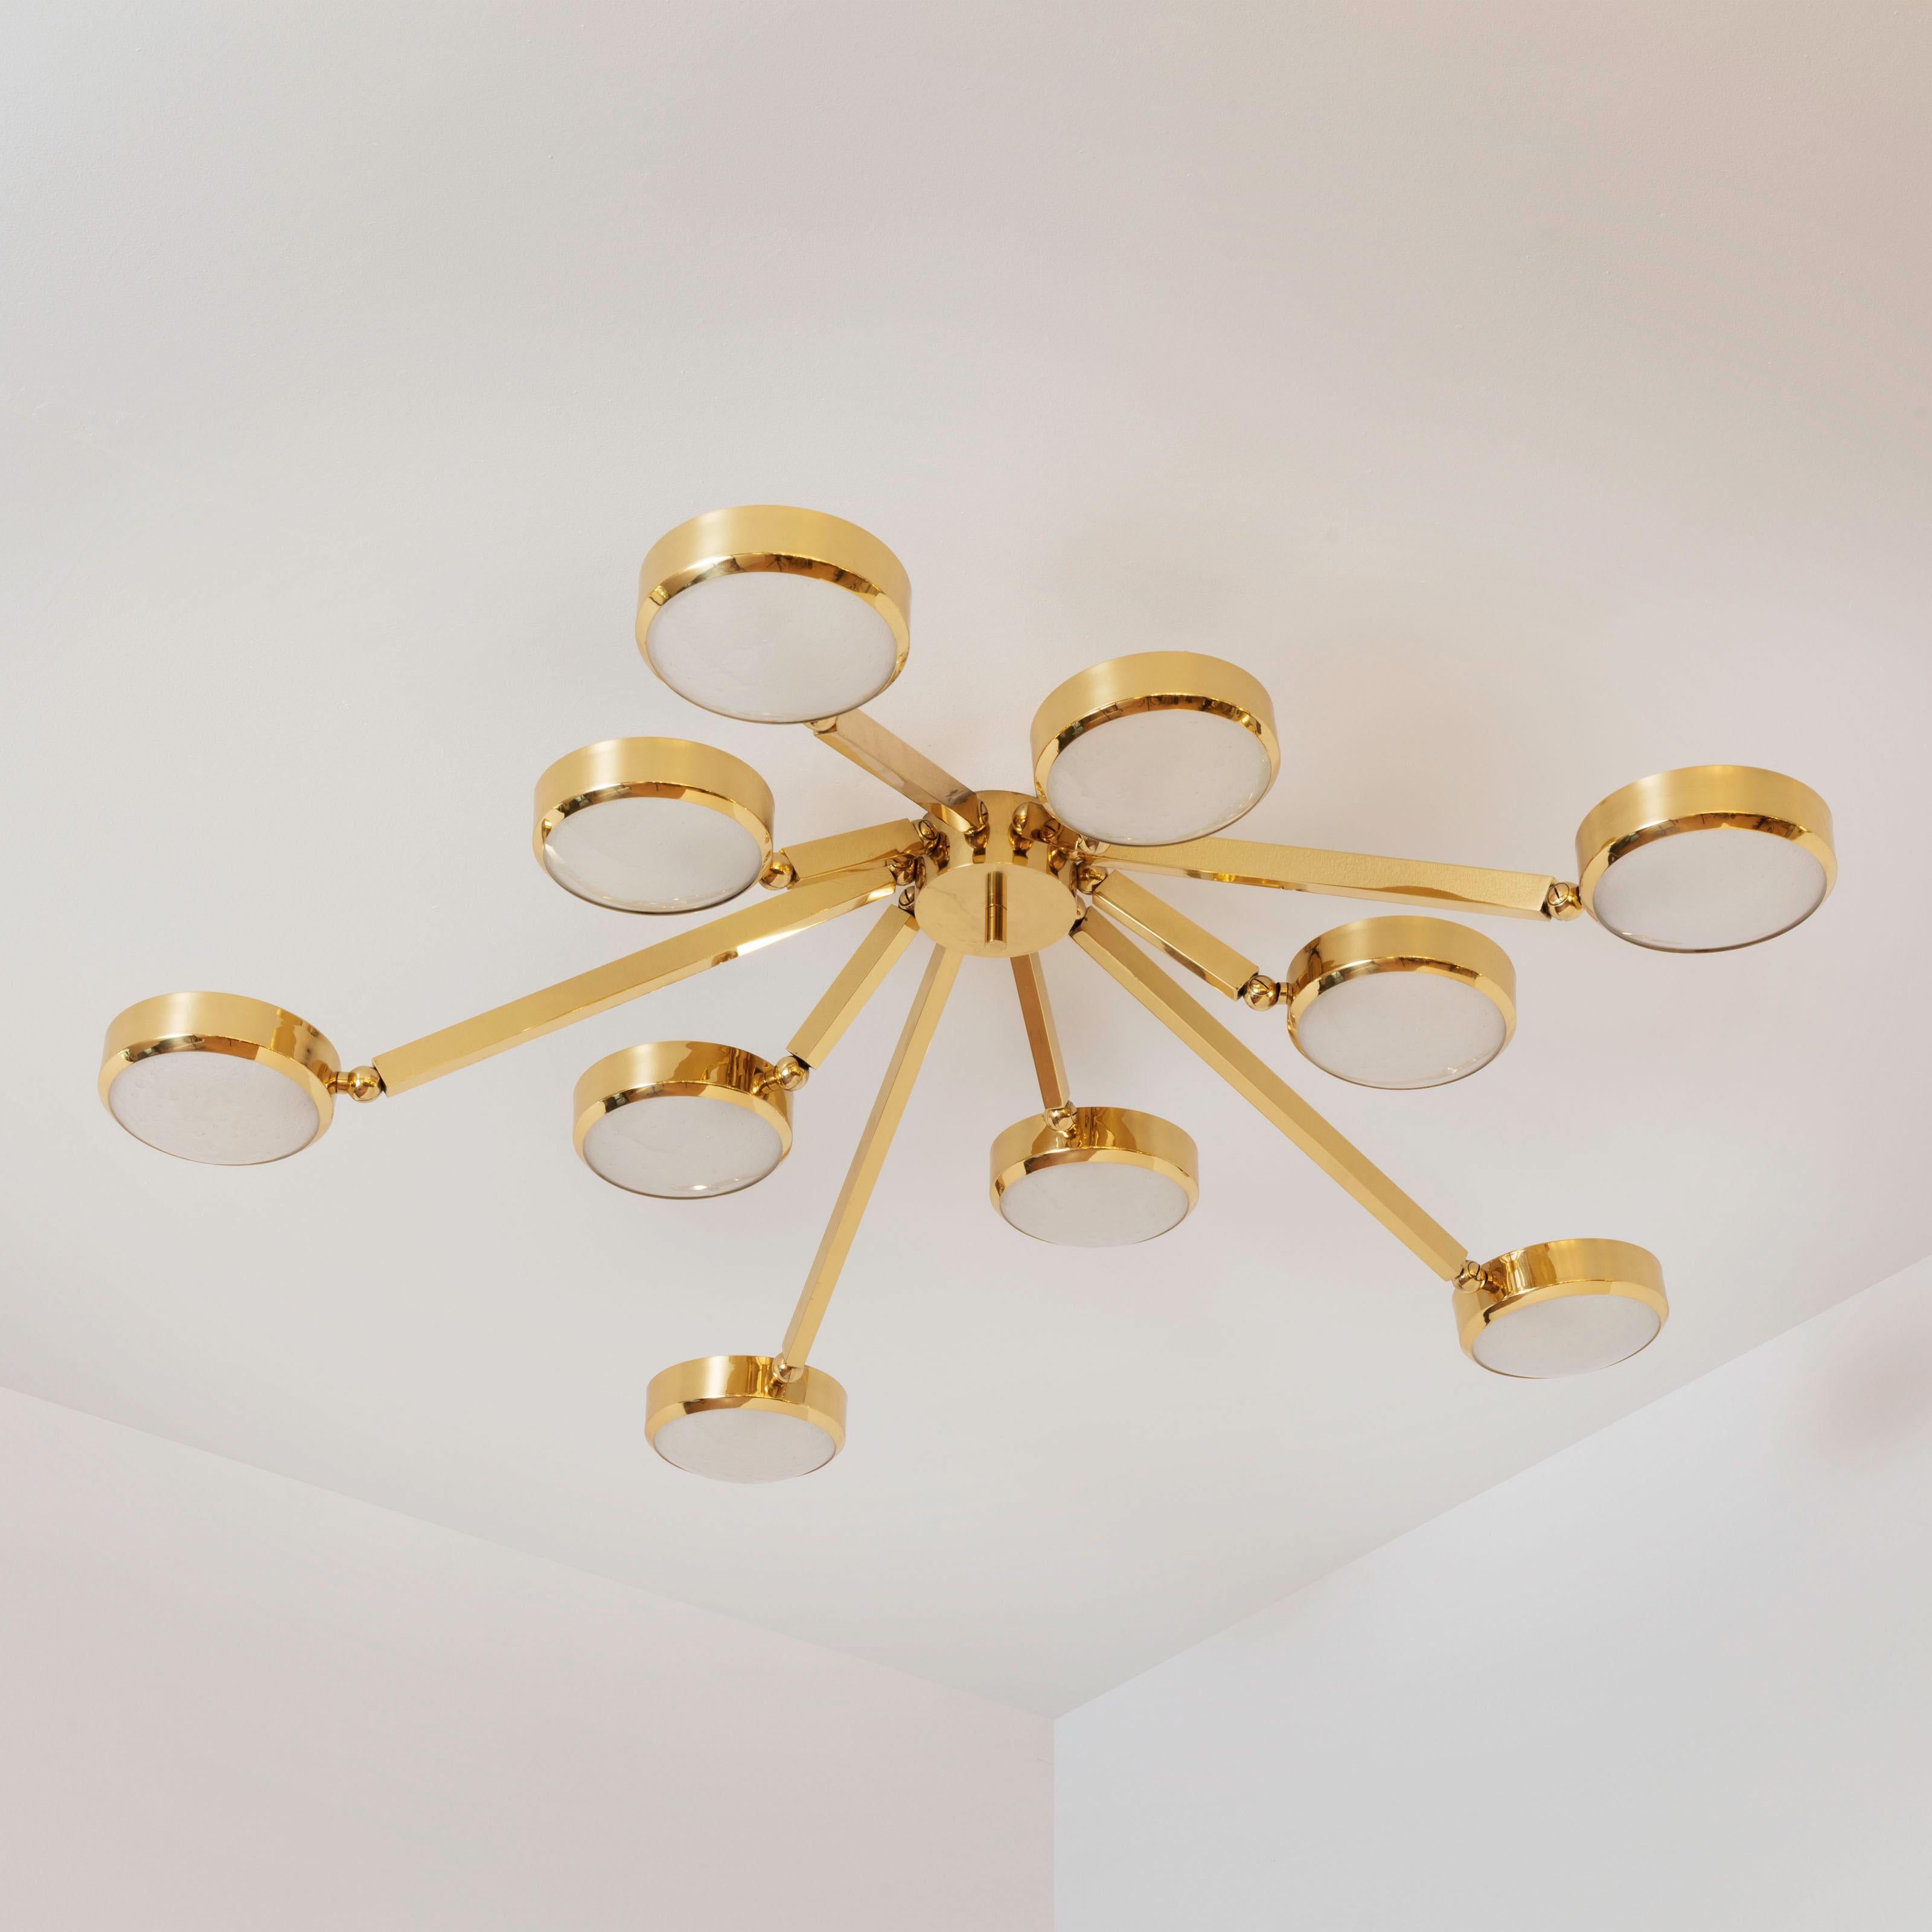 Contemporary Oculus Ceiling Light by Gaspare Asaro-Murano Glass and Bronze Finish For Sale